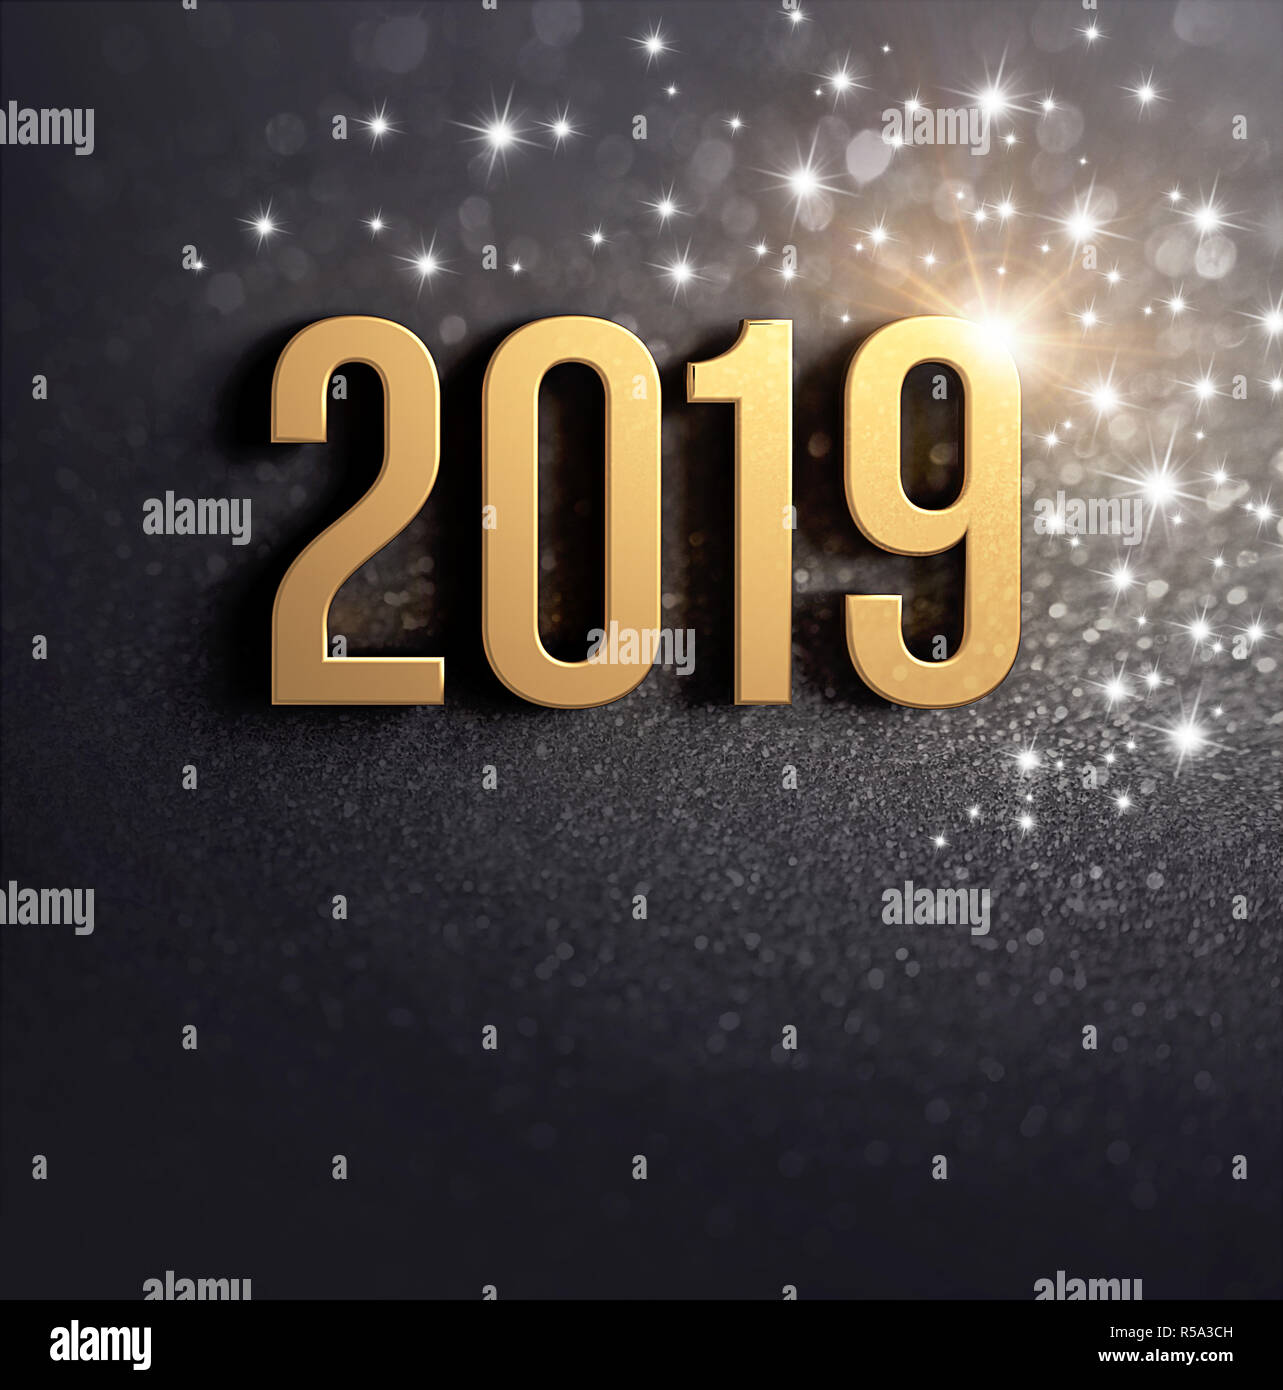 New Year 2019 date number colored in gold, on a festive black background, with glitters and stars - 3D illustration Stock Photo